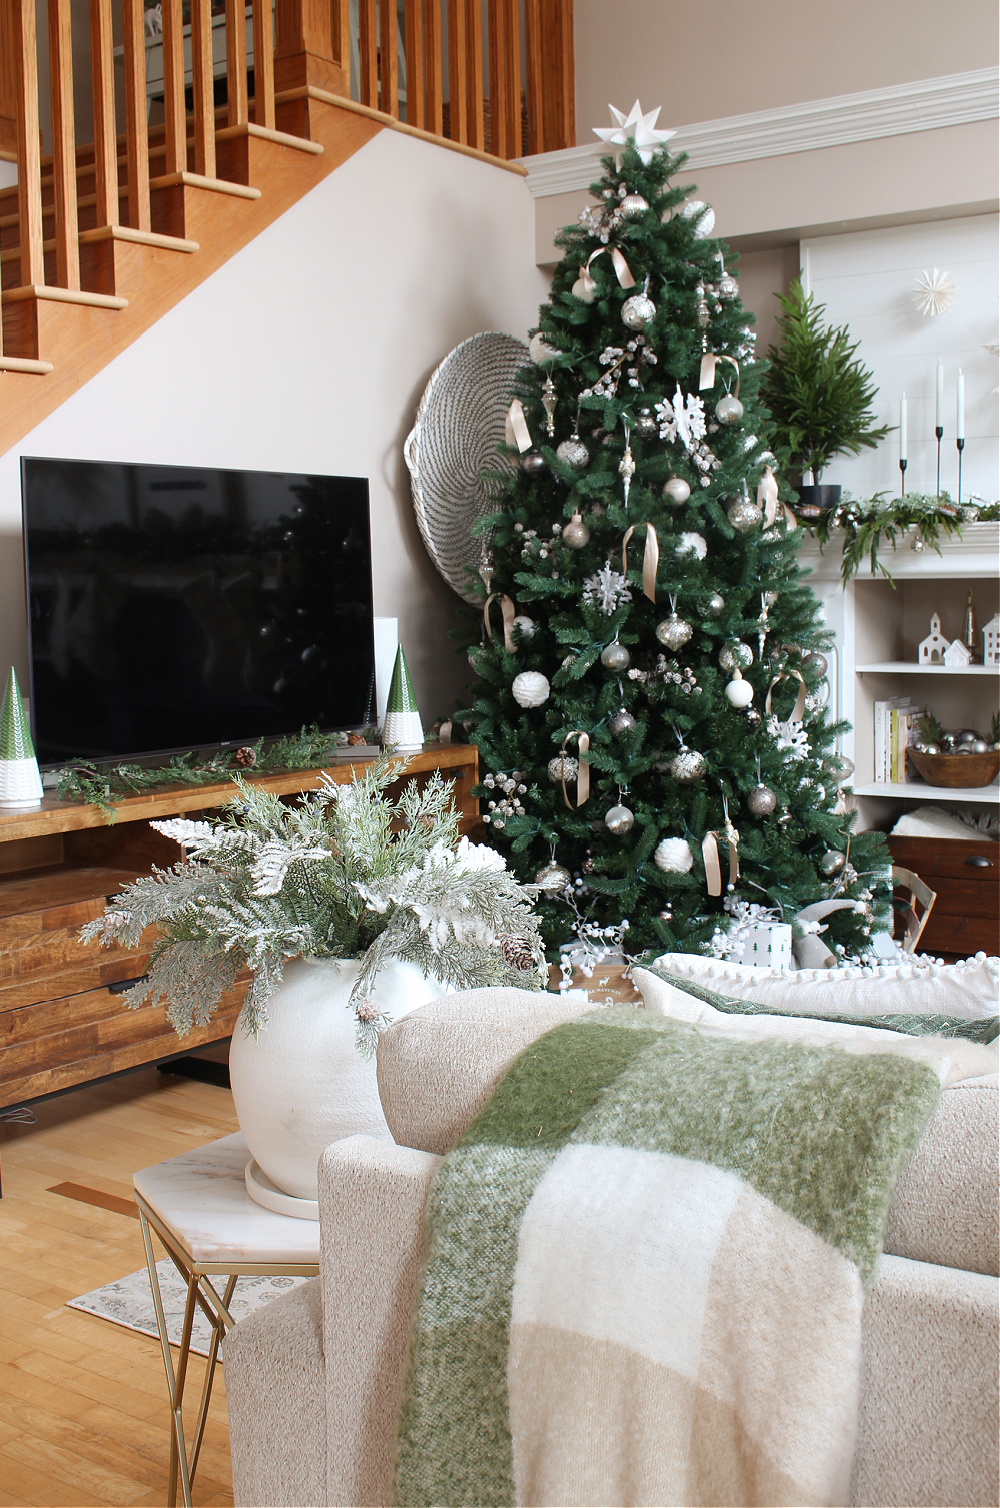 Green and White Christmas Living Room Decor Ideas - Clean and ...